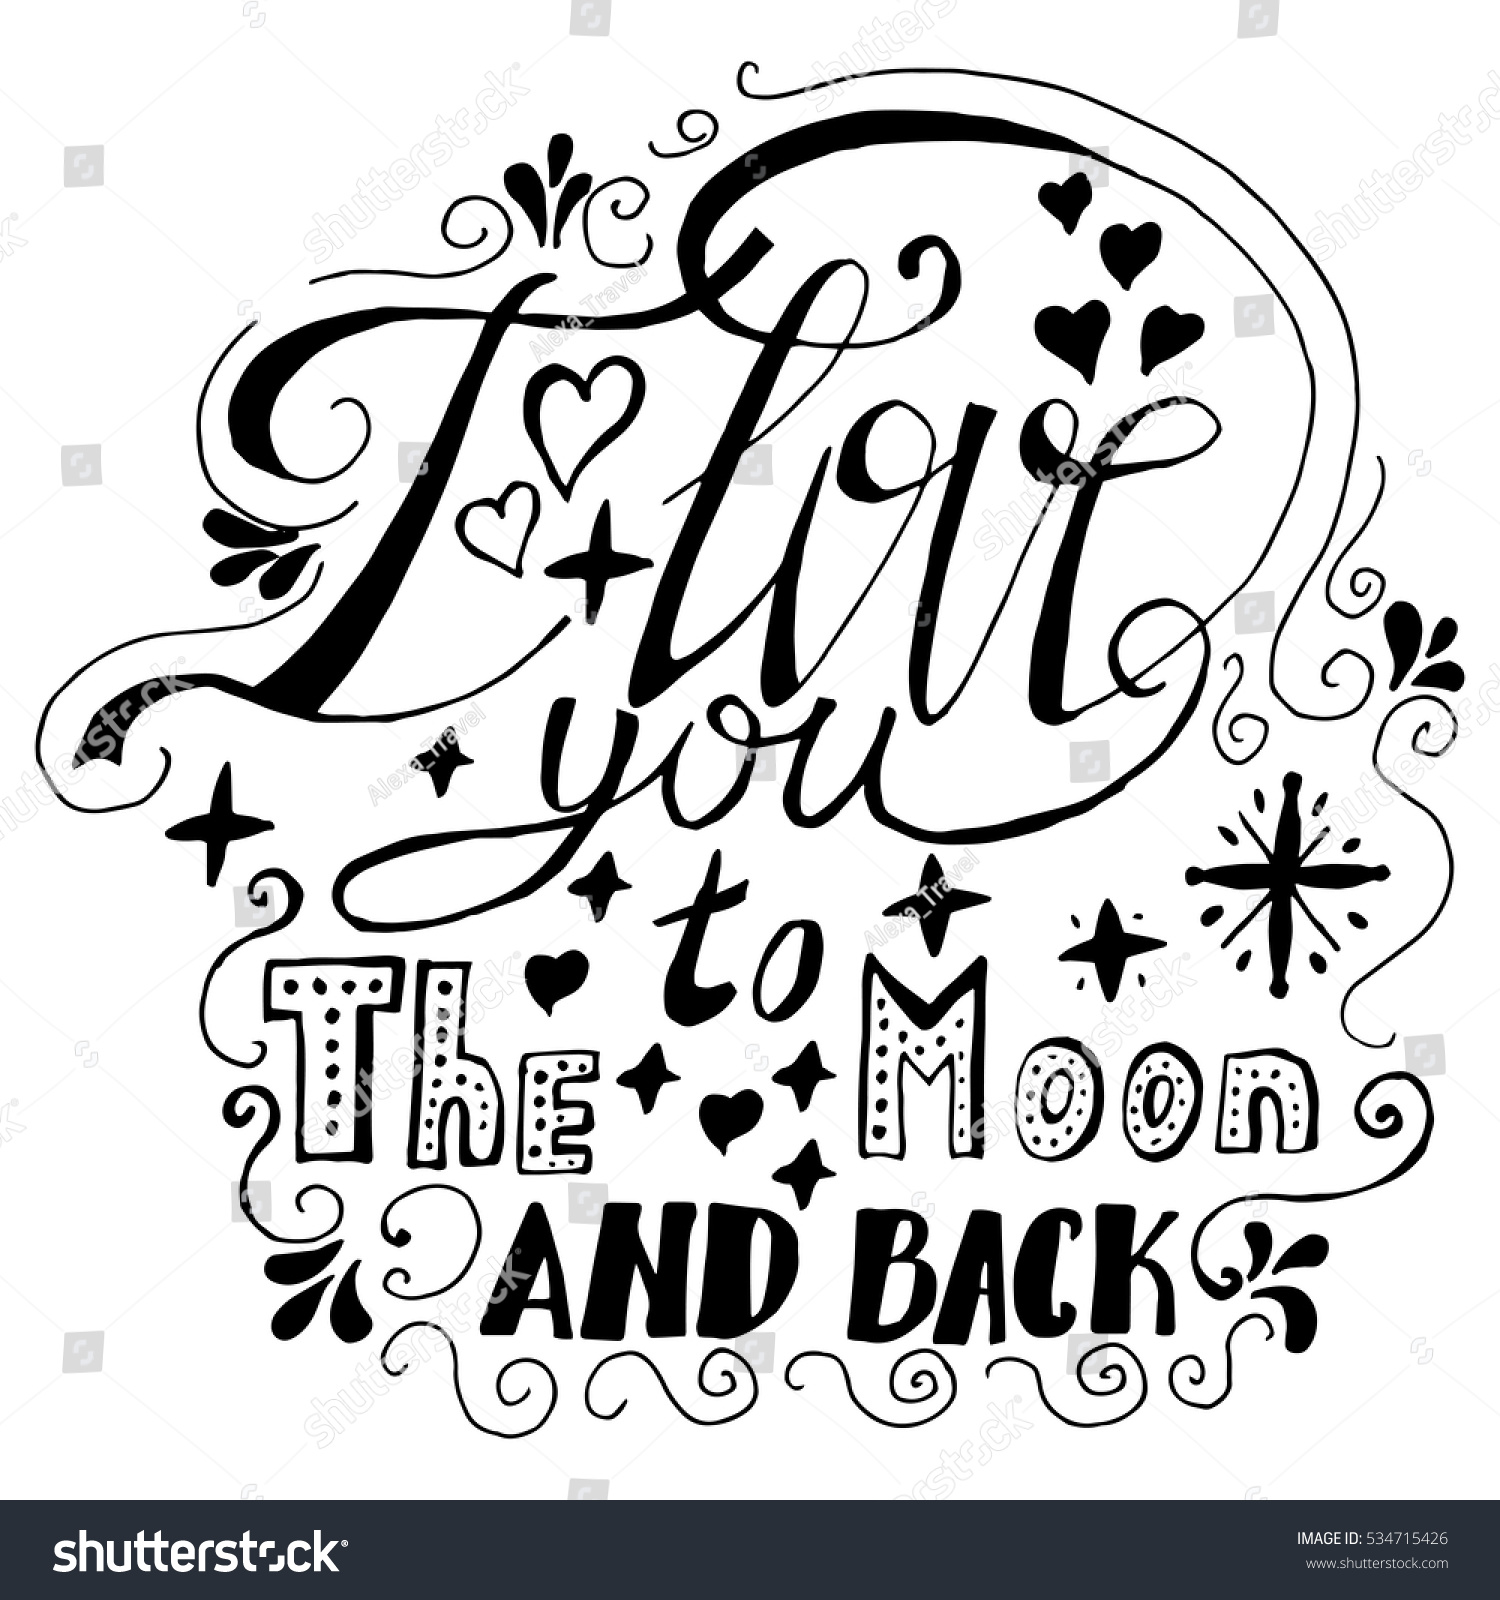 I love you to the moon and back Hand drawn romantic quote on white background